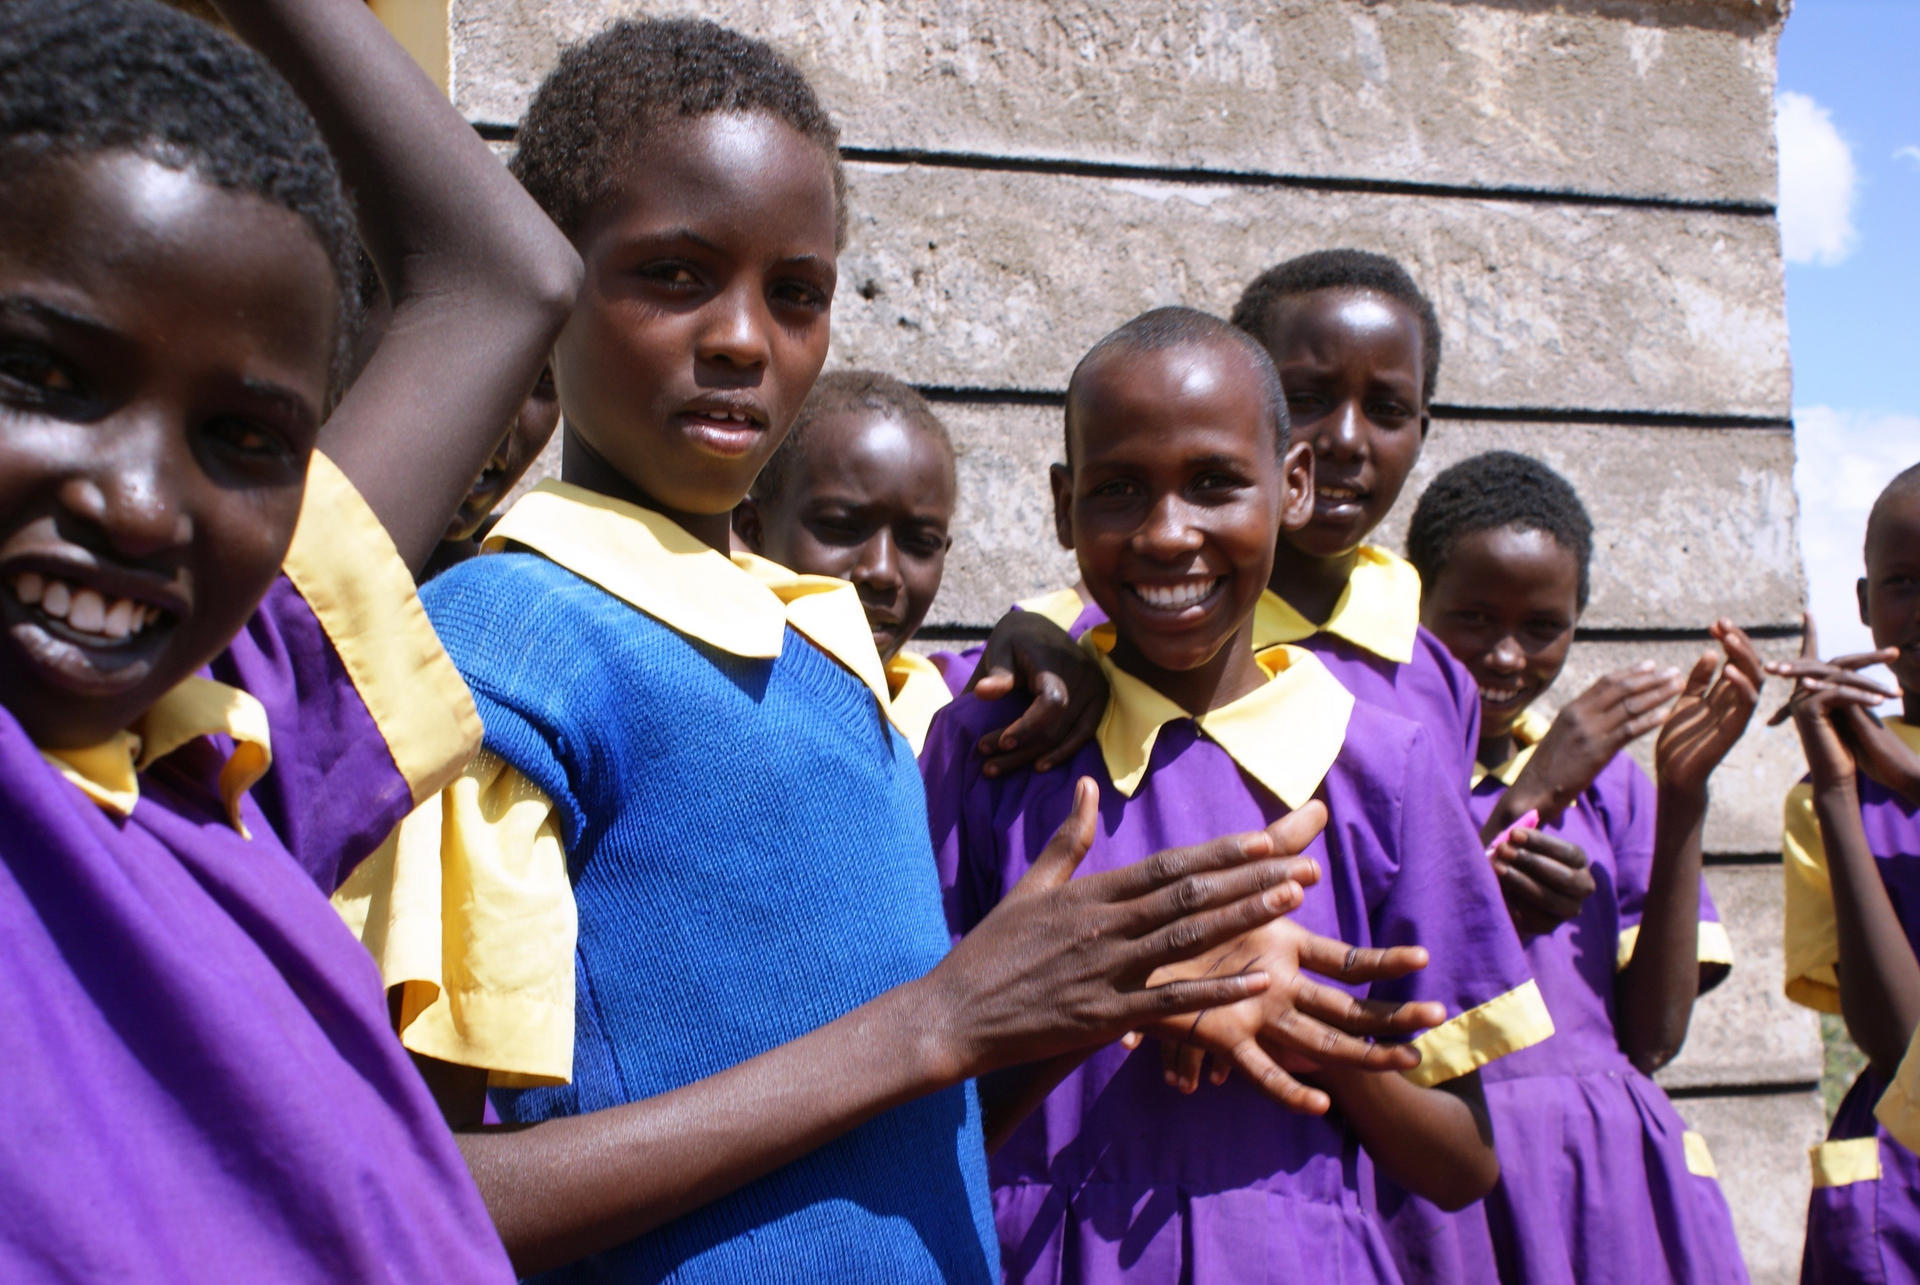 Students at one of the mobile schools in northern Kenya. Photo: Thomson Reuters Foundation